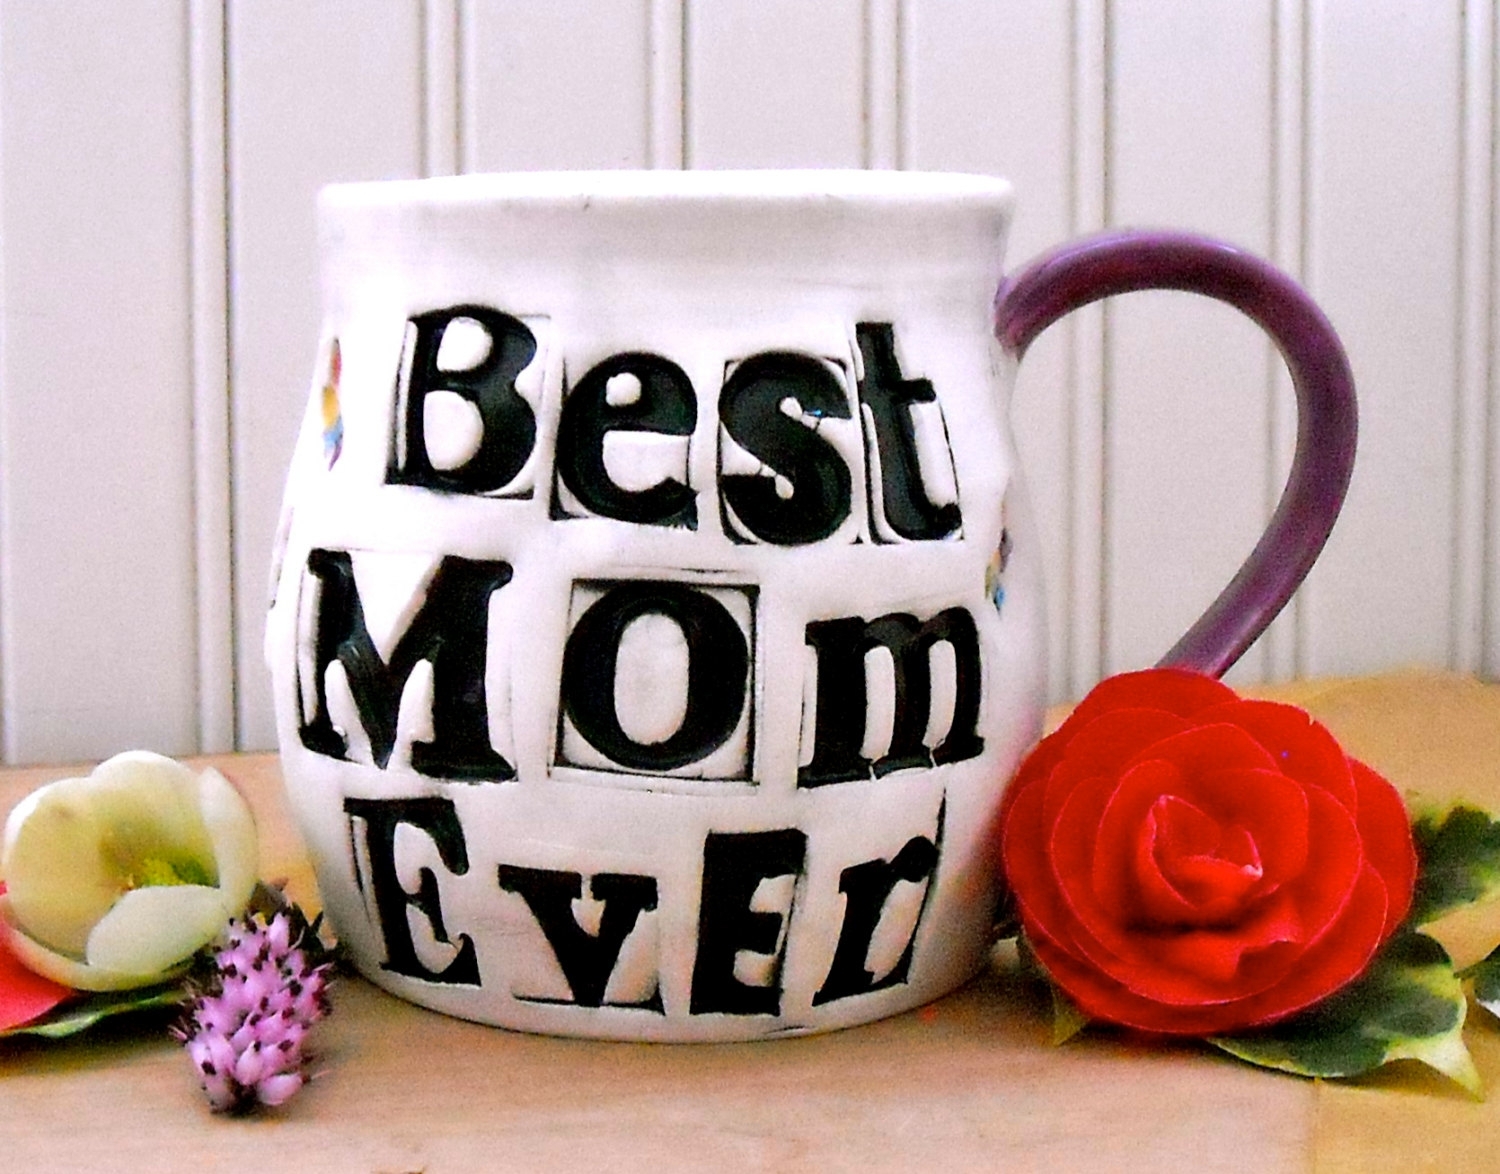 Mom Christmas Gift Ideas for Family Members - Cheap List for Siblings & Parents